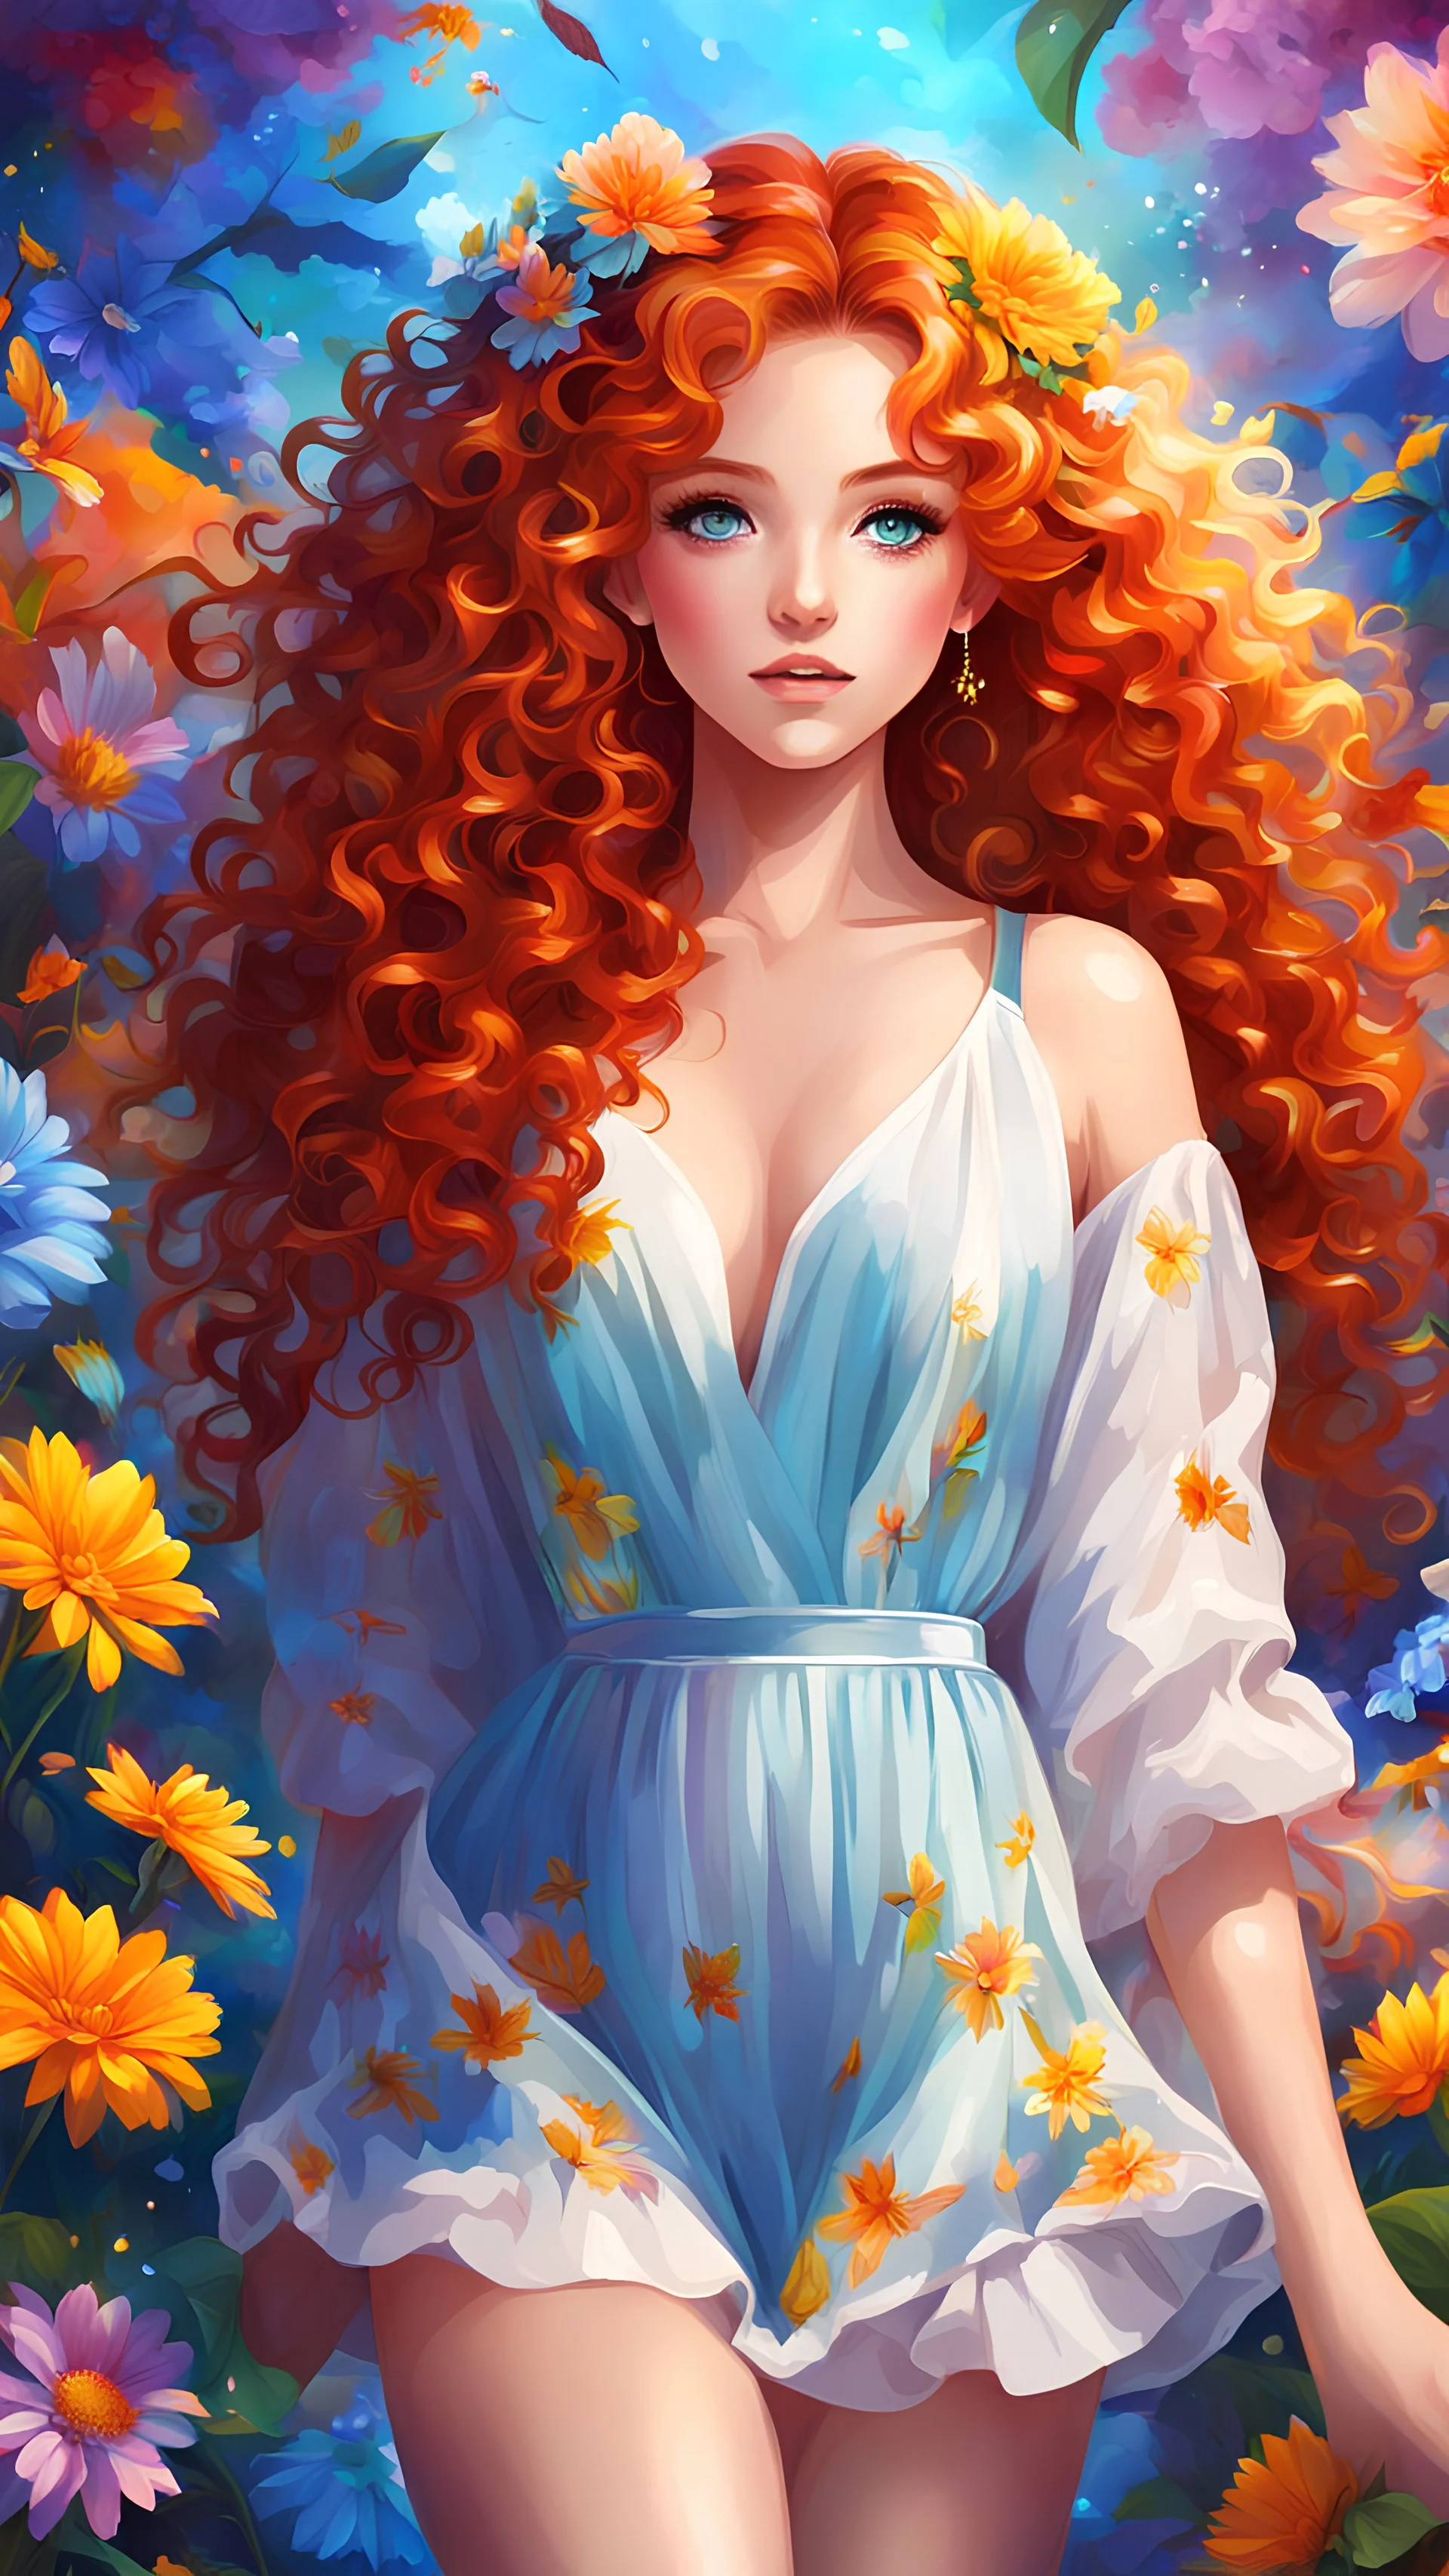 aman banwait add photo anime girl with curly red hair